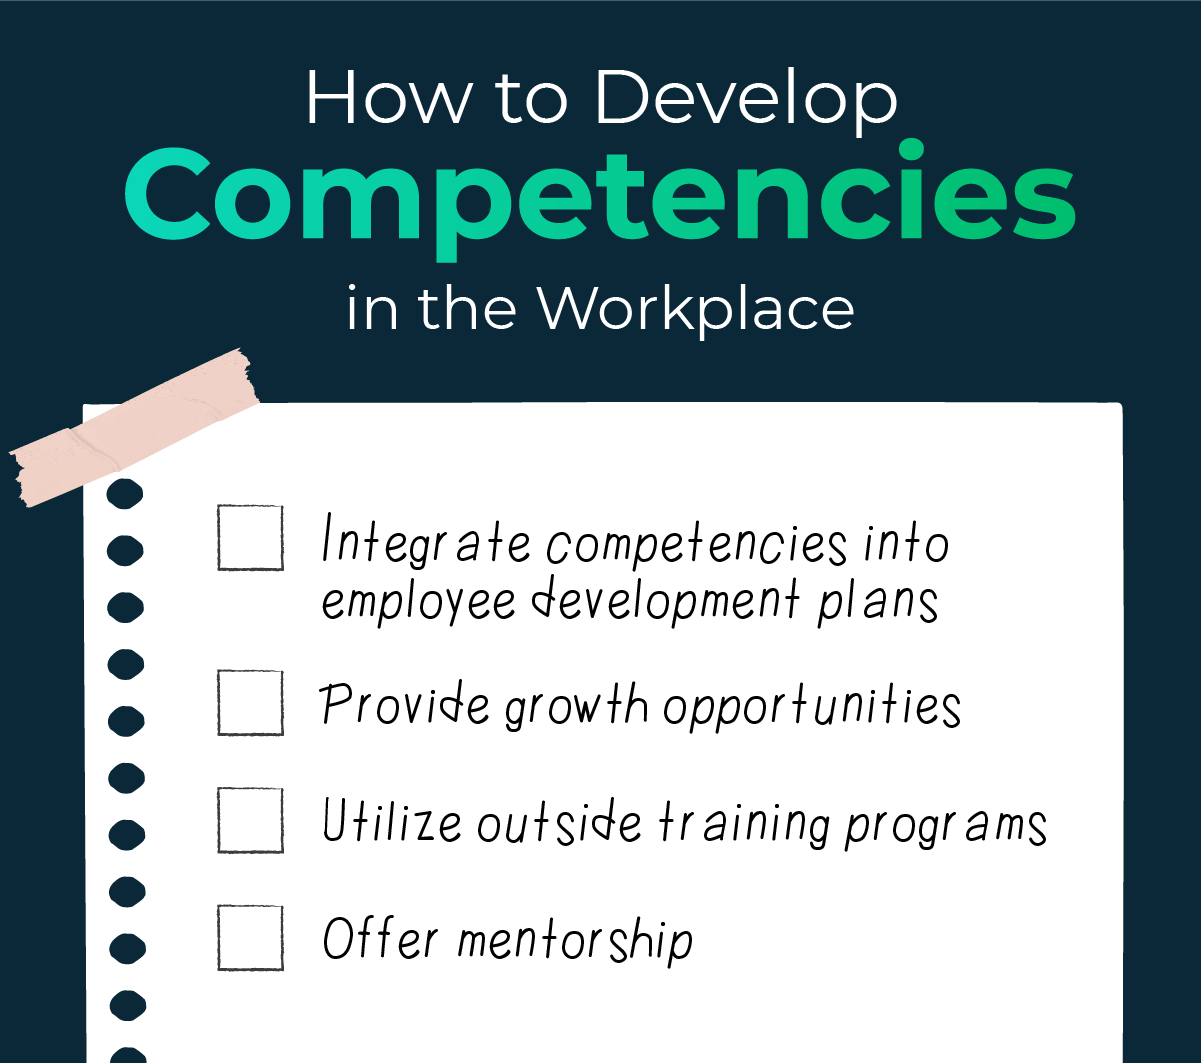 Checklist explaining four steps to develop competencies in the workplace